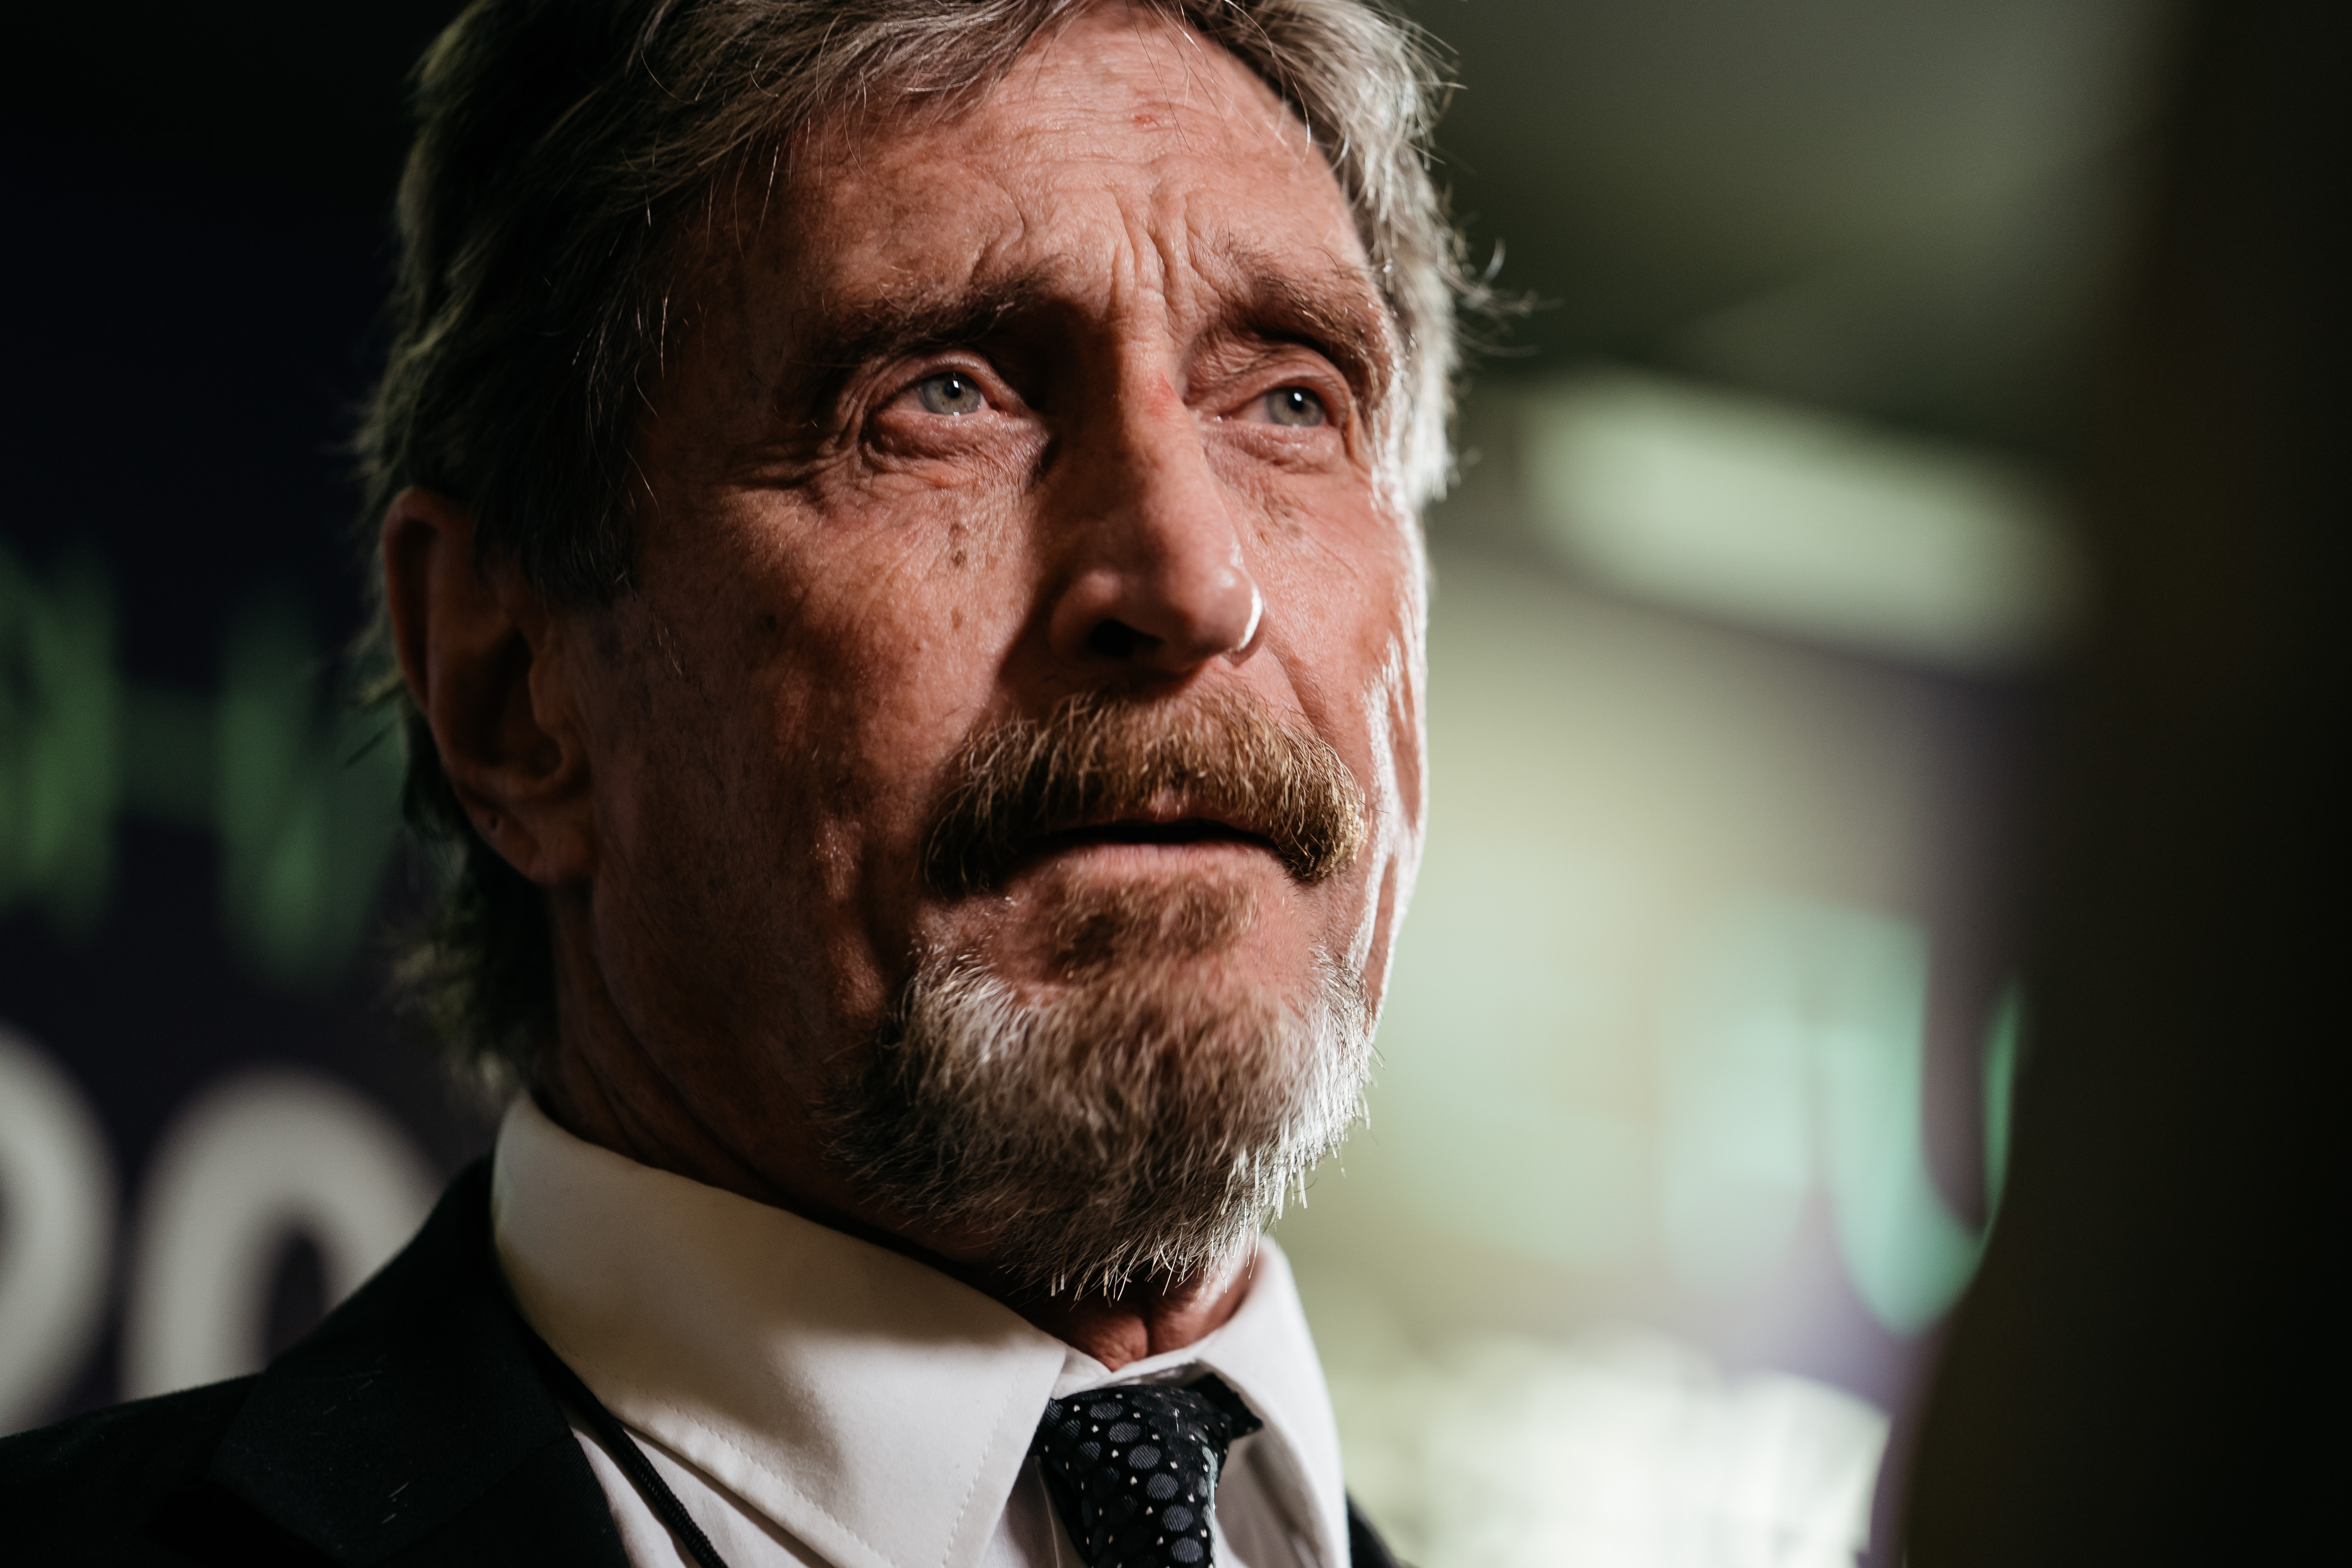  John McAfee found dead in Spanish prison cell 